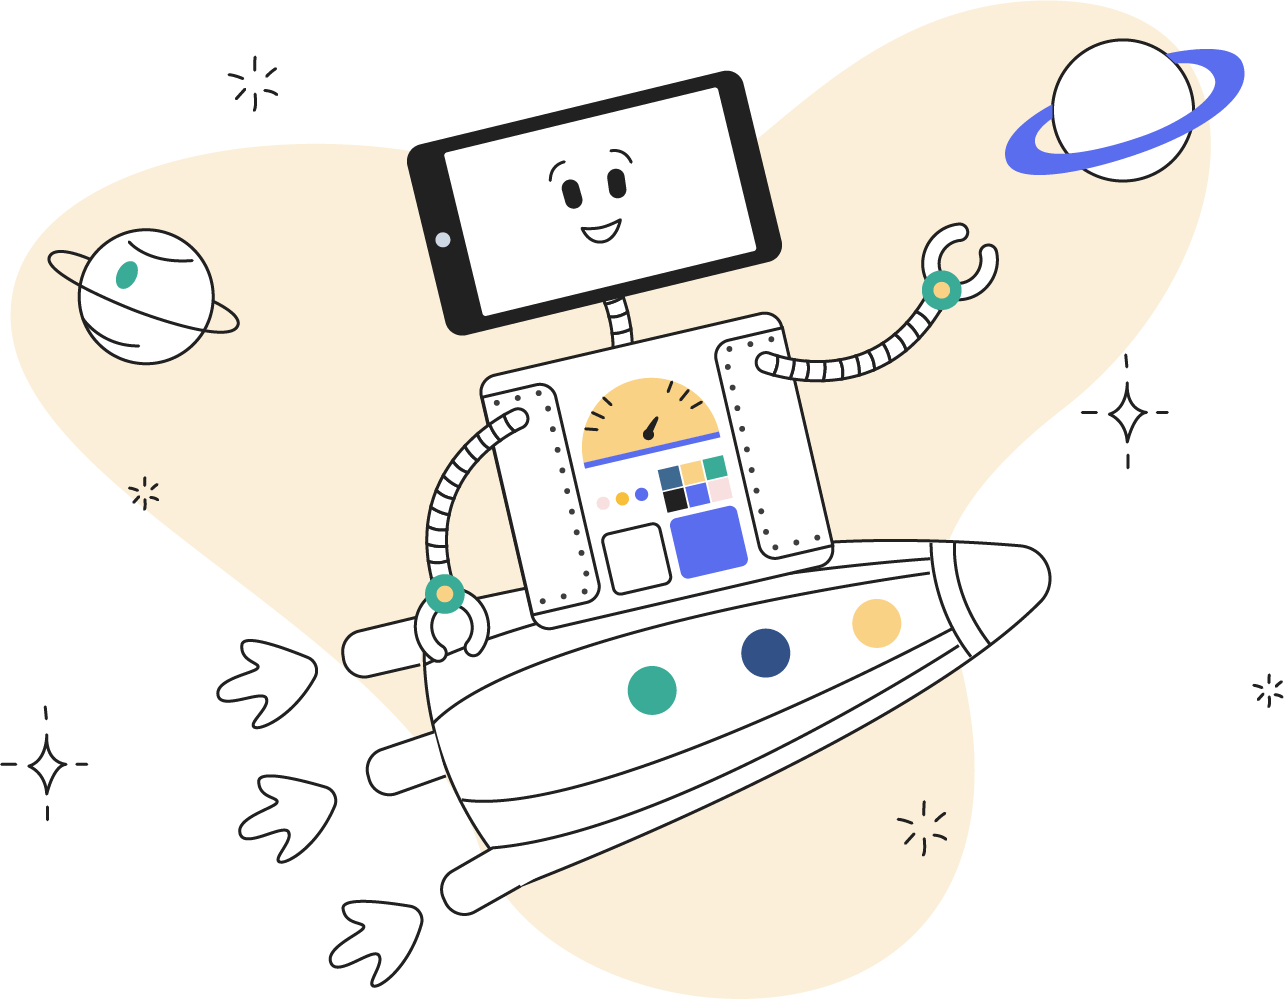 3 disruptive marketing techniques employed by these fearless FinTechs - image shows Artie the Articulate robot on a rocketship